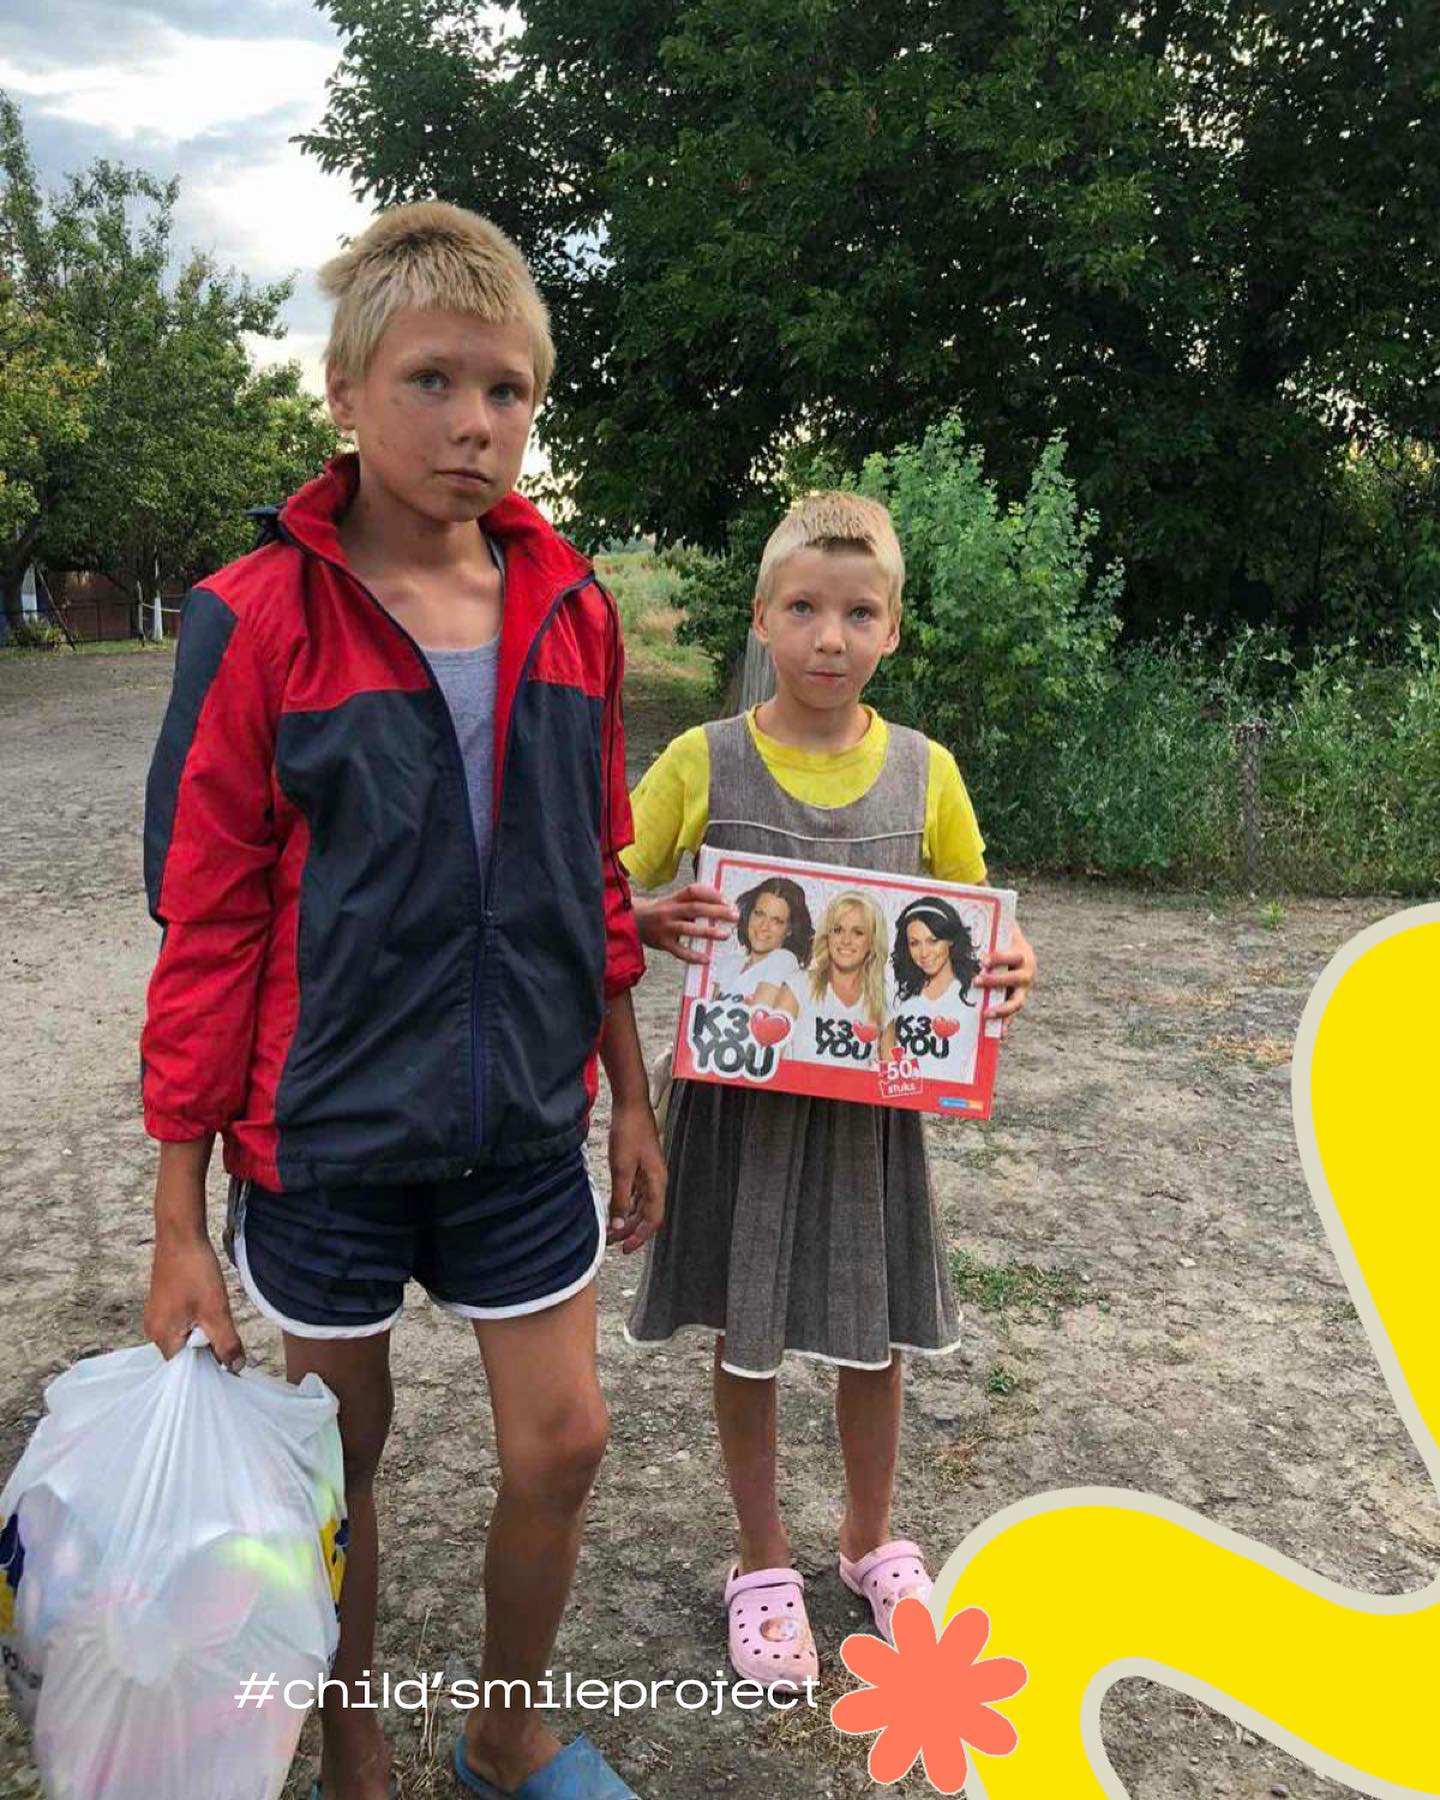 two children standing next to each other holding a sign.